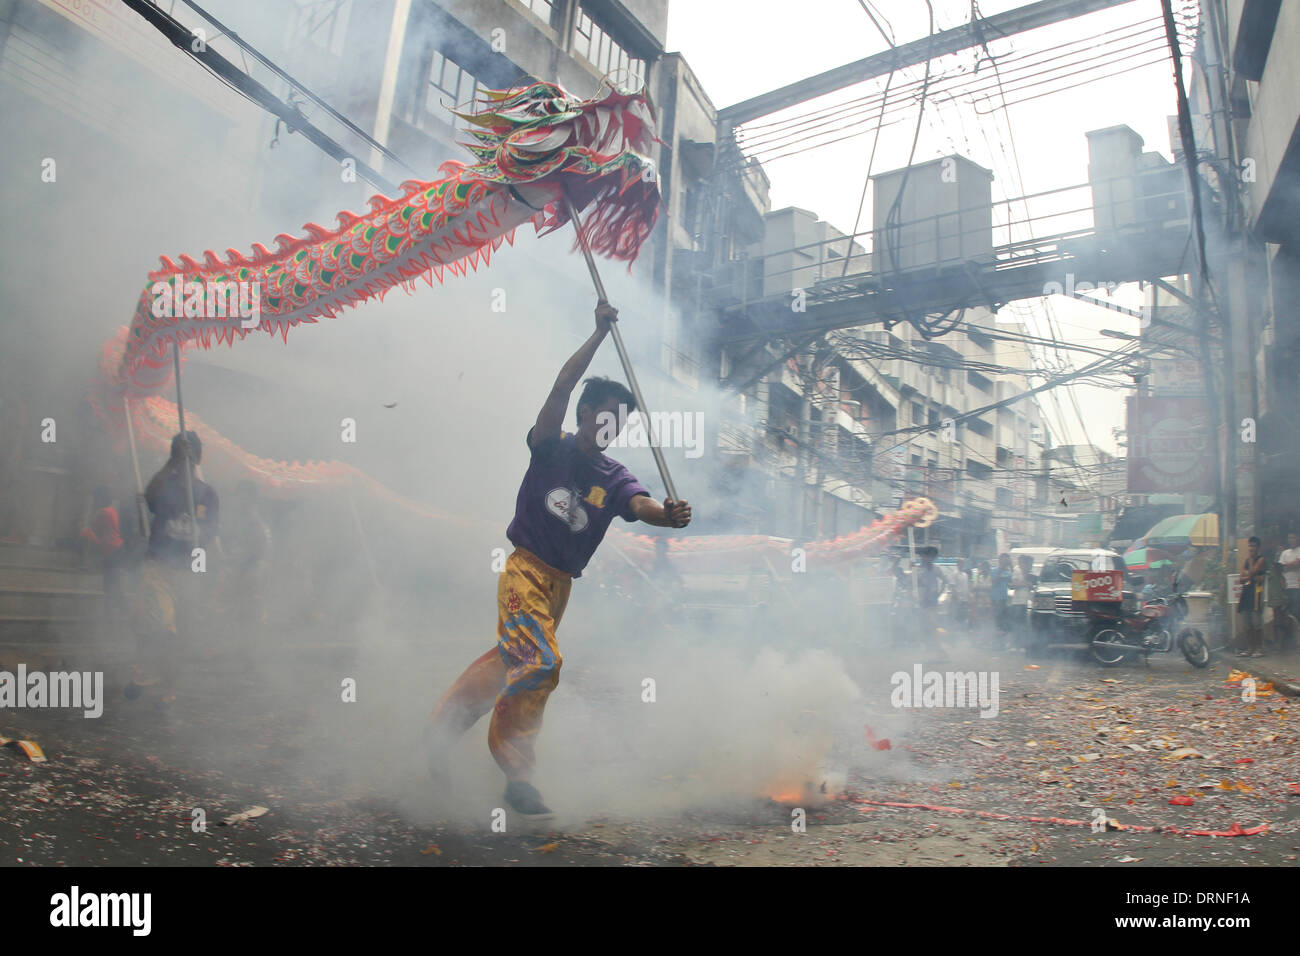 Manila, Phillipines. 30th January 2014. Street performers carry their dragon around firecrackers in Chinatown Manila a day before the Chinese New Year on January 30, 2014. Lucky charms, fruits, street performers and firecrackers were seen around Chinatown in Manila, a day before the celebration of the Chinese New Year, the Year of the Horse. Photo by Mark Cristino/Alamy Live News Stock Photo